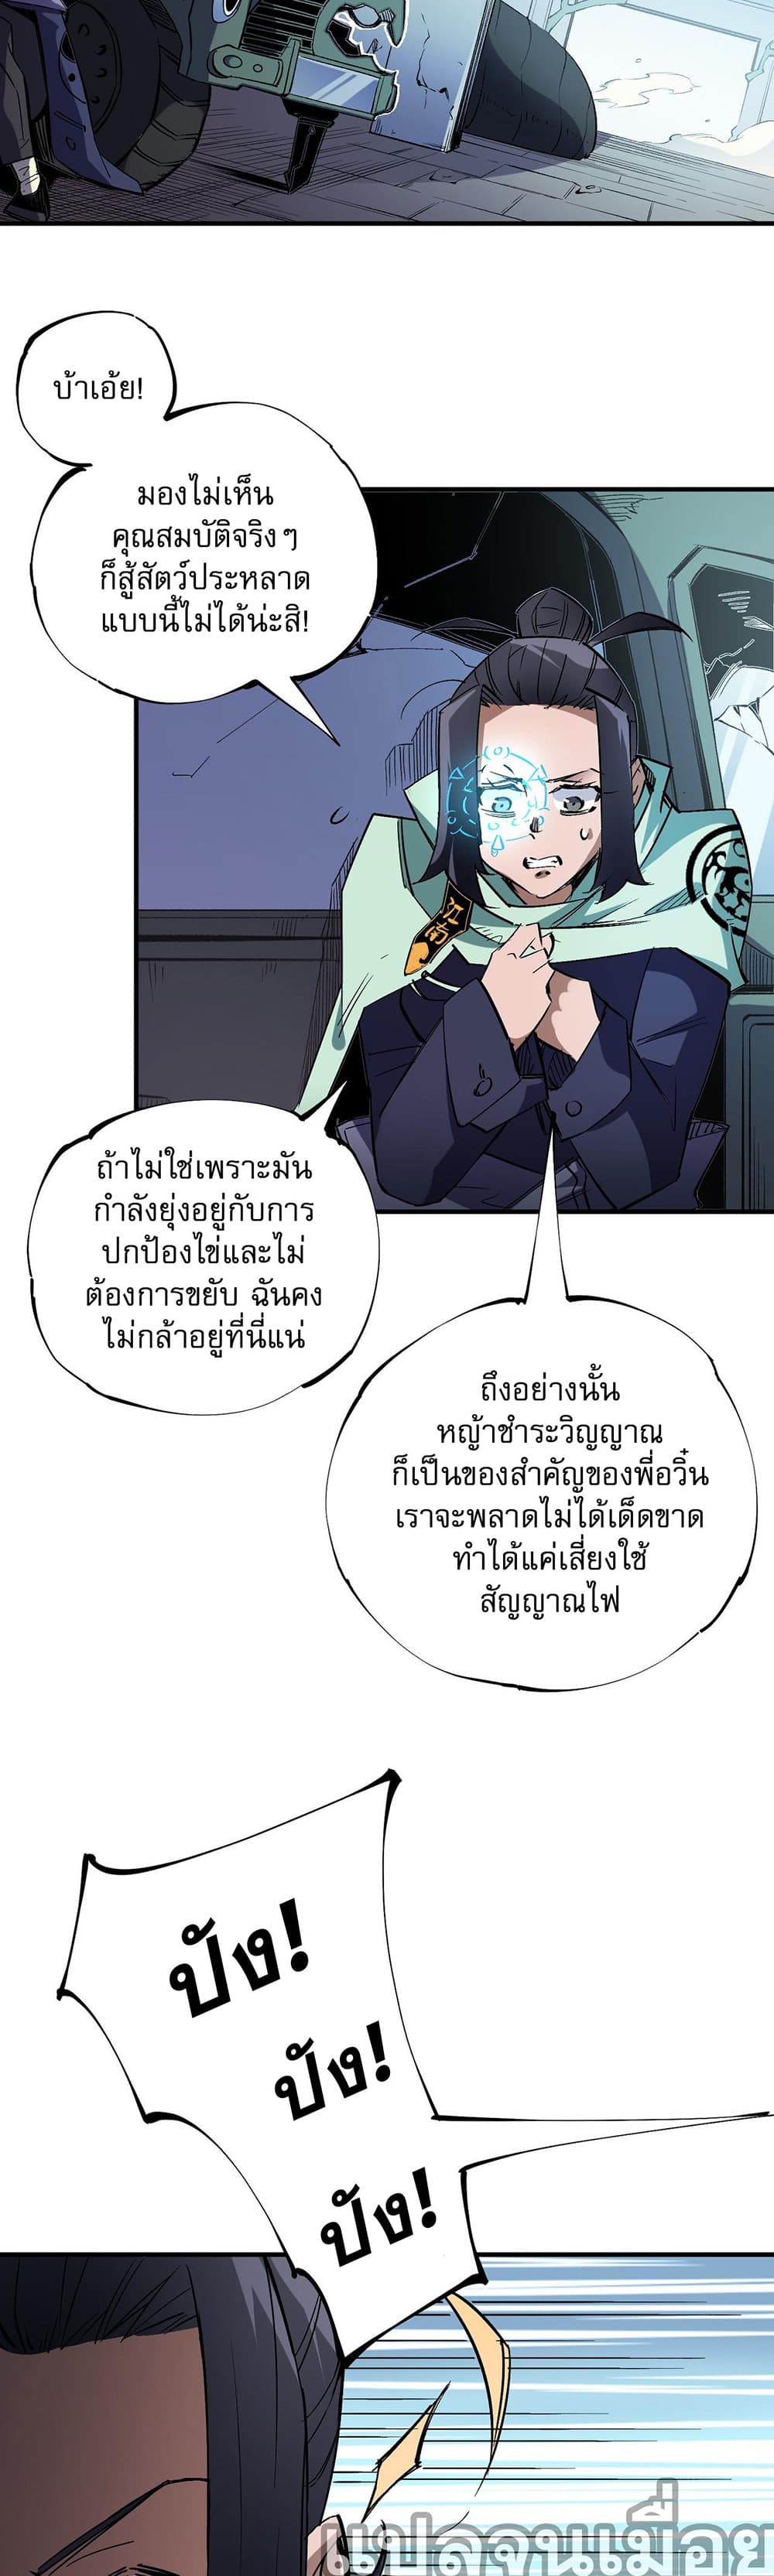 Job Changing for the Entire Population: The Jobless Me Will Terminate the Gods ฉันคือผู้เล่นไร้อาชีพที่สังหารเหล่าเทพ 39-39